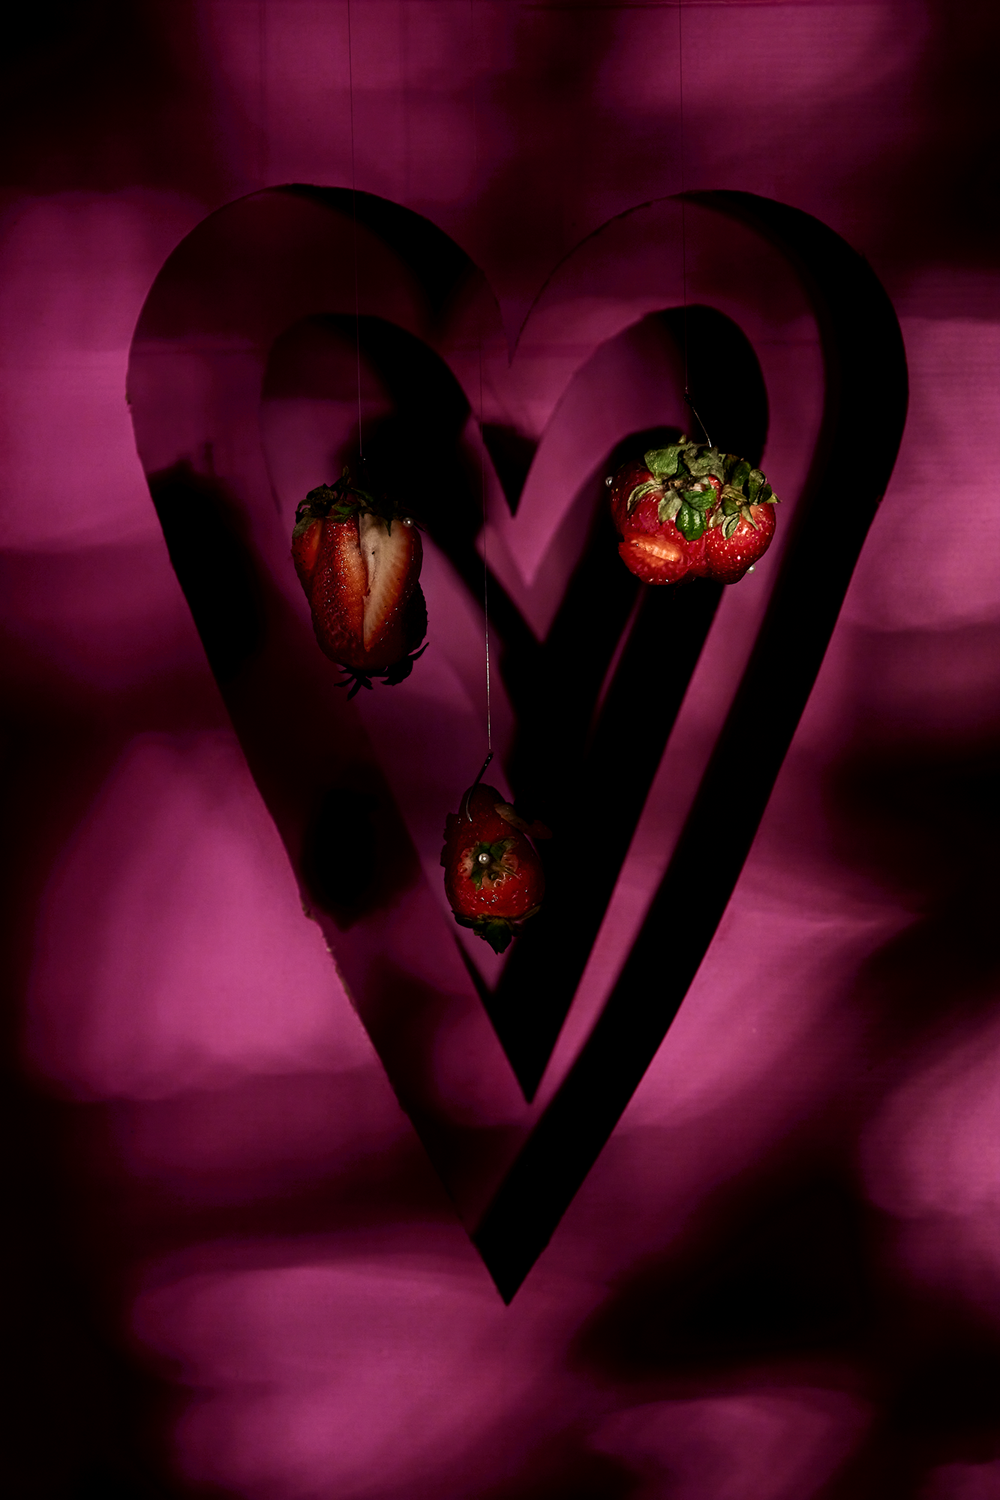 Colour photograph of three strawberries. Strawberries hang in a heart shaped void in a magenta background with dappled light.